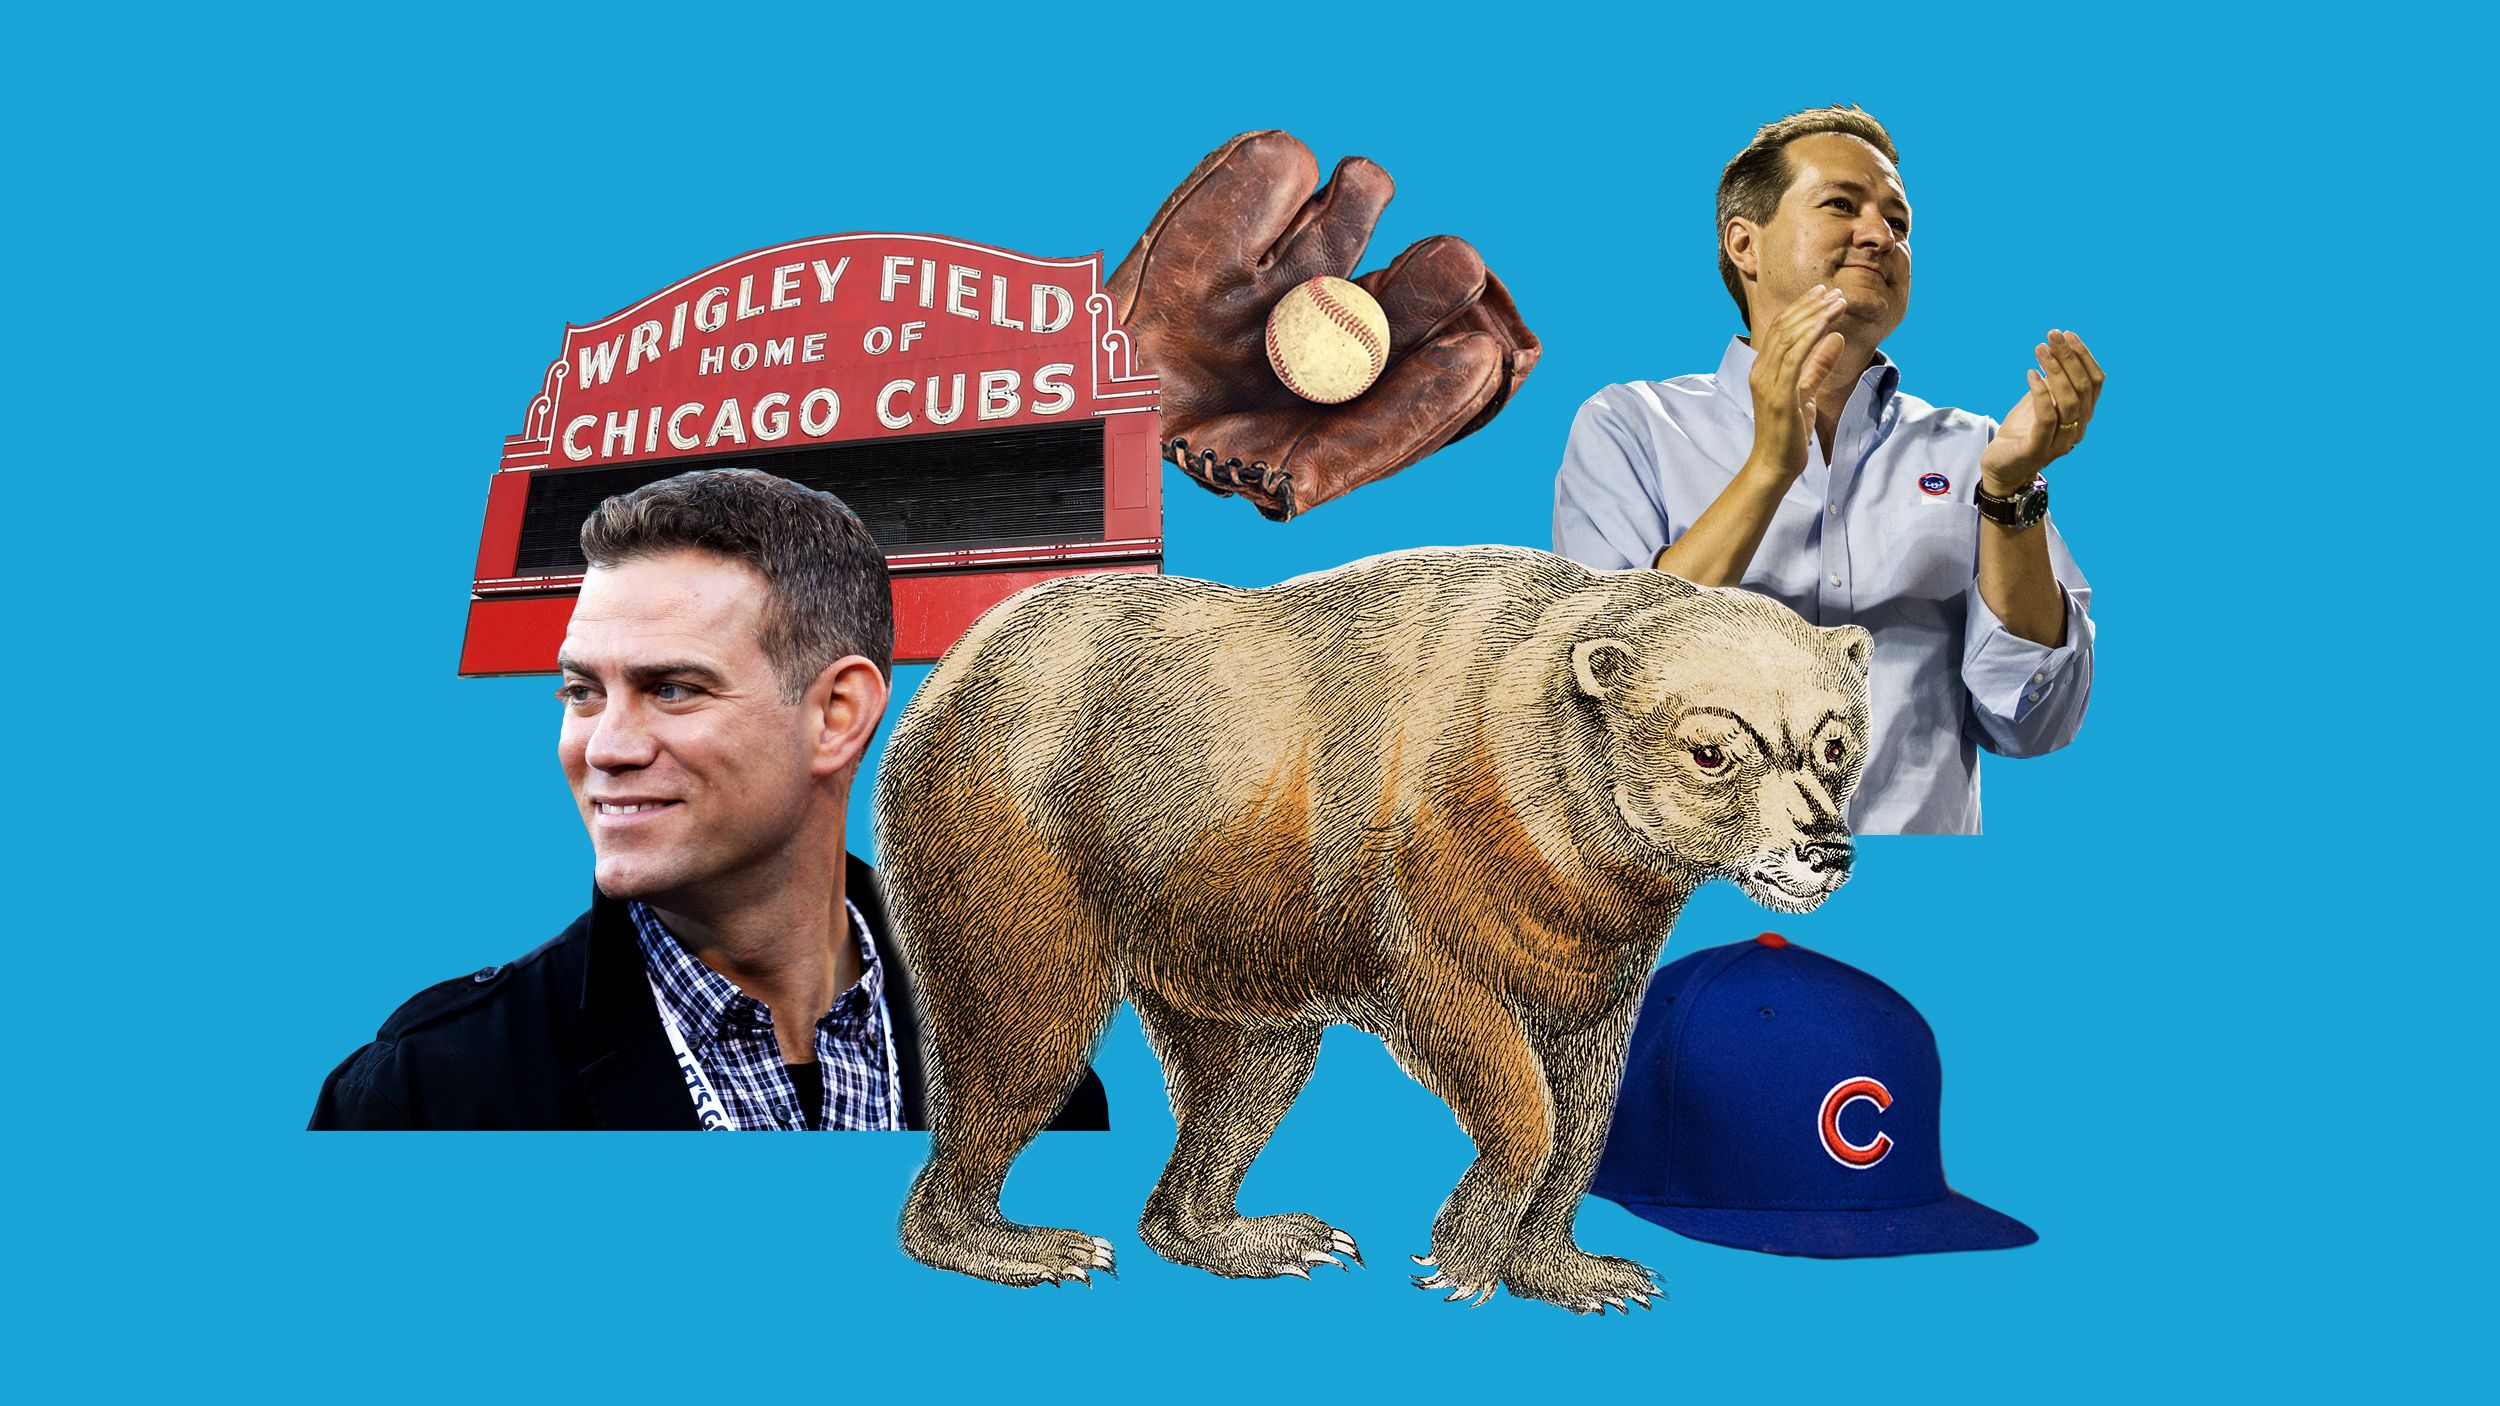 Lovable losers: The agonizing history of the Chicago Cubs